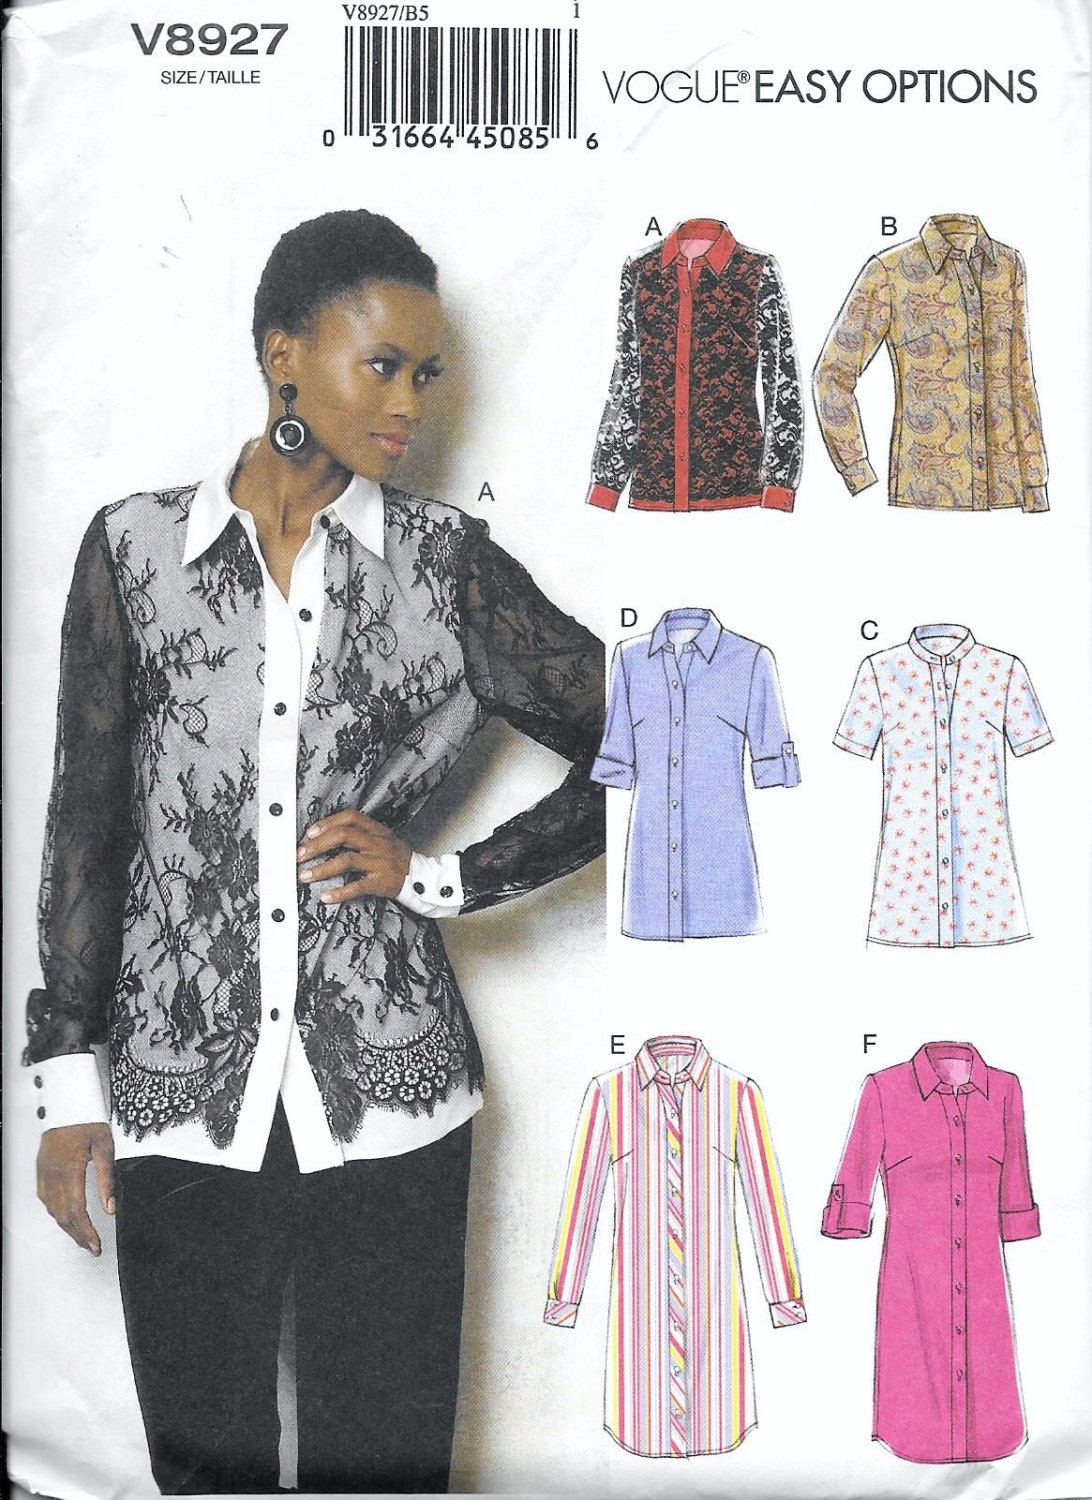  Vogue  8927 Easy Options Botton Down Shirt  Top Blouse Sewing